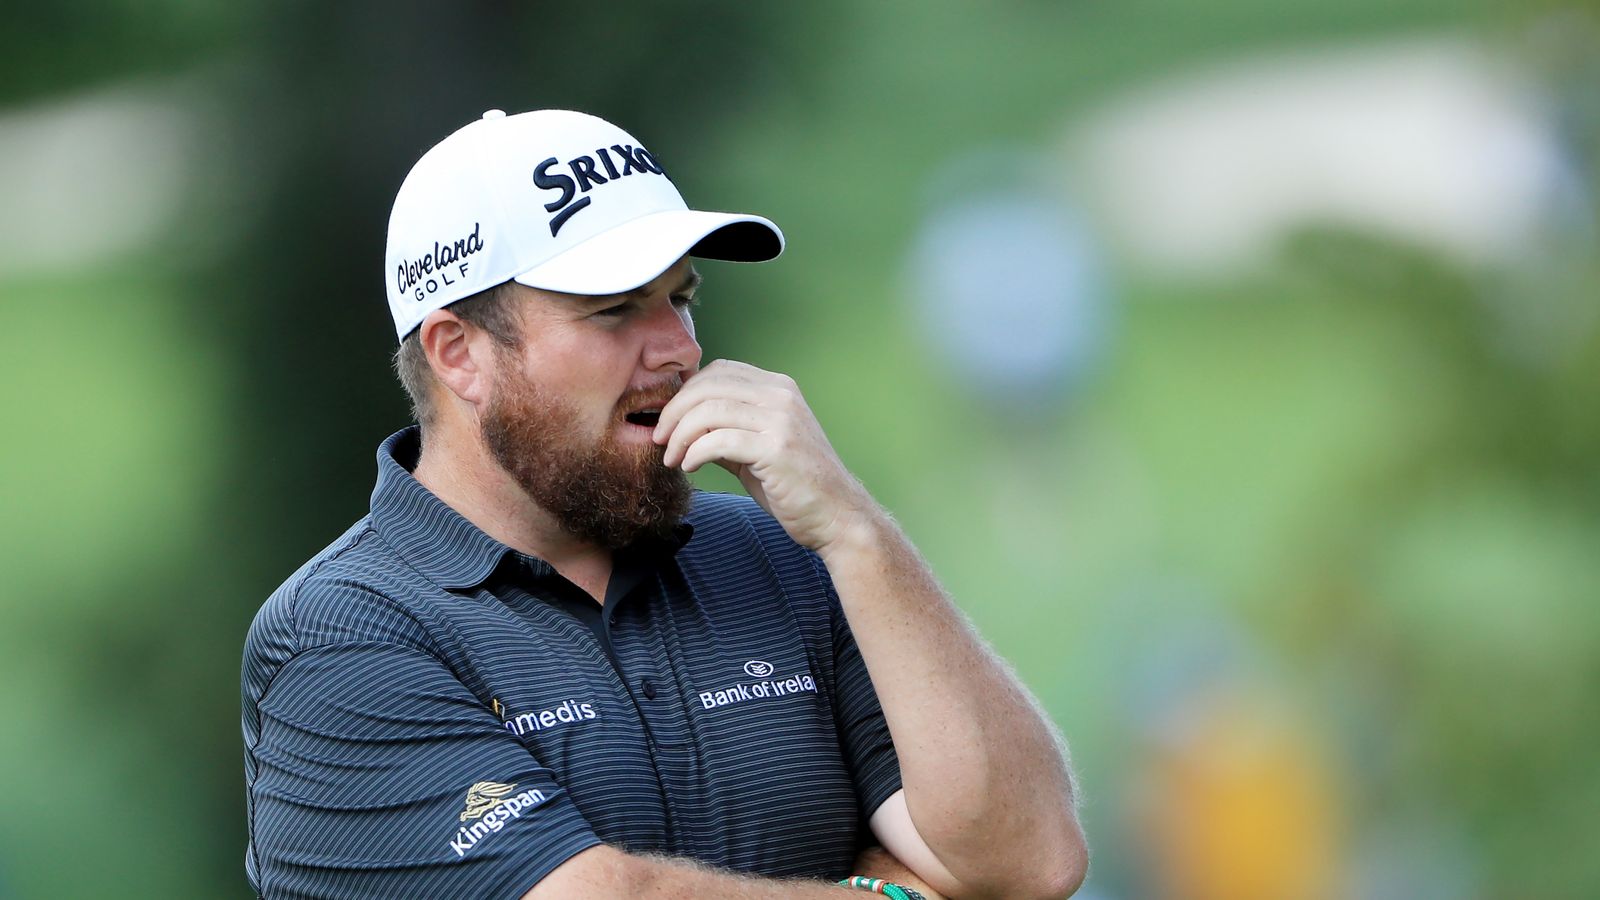 Shane Lowry battles to stay Race to Dubai No 1 at Dunhill Links | Golf ...